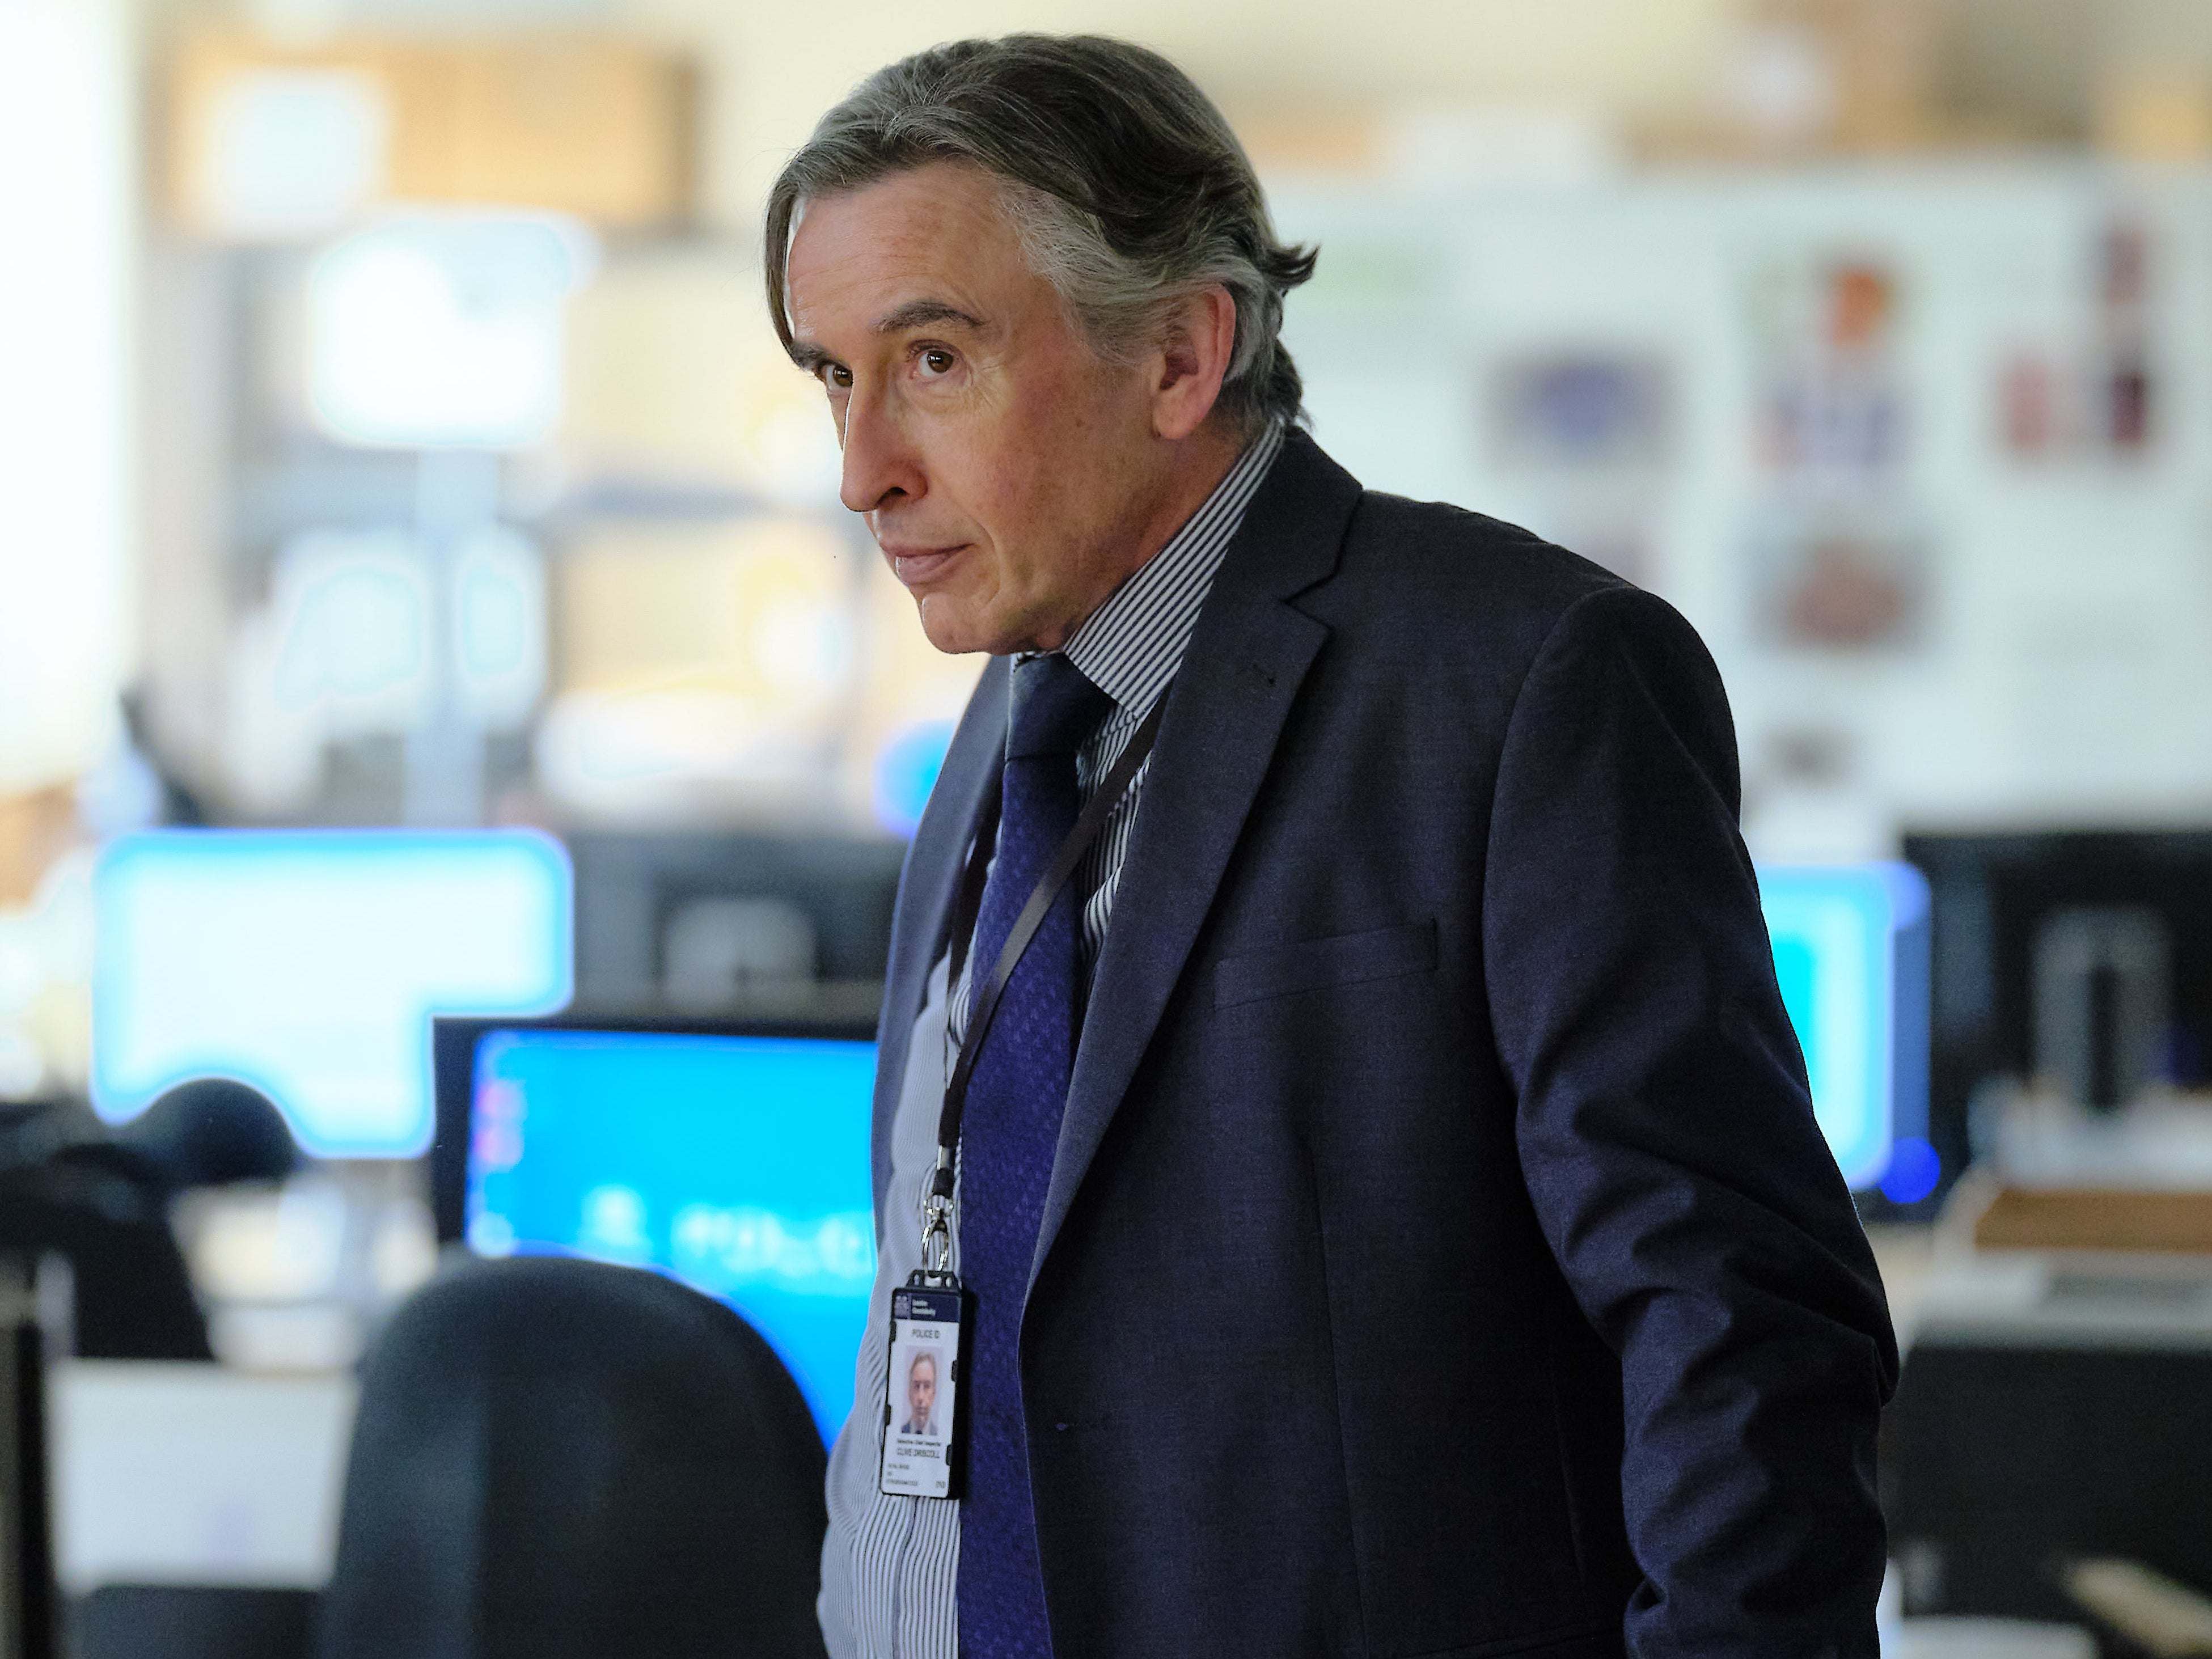 Steve Coogan as DCI Driscoll in ITV’s new drama Stephen